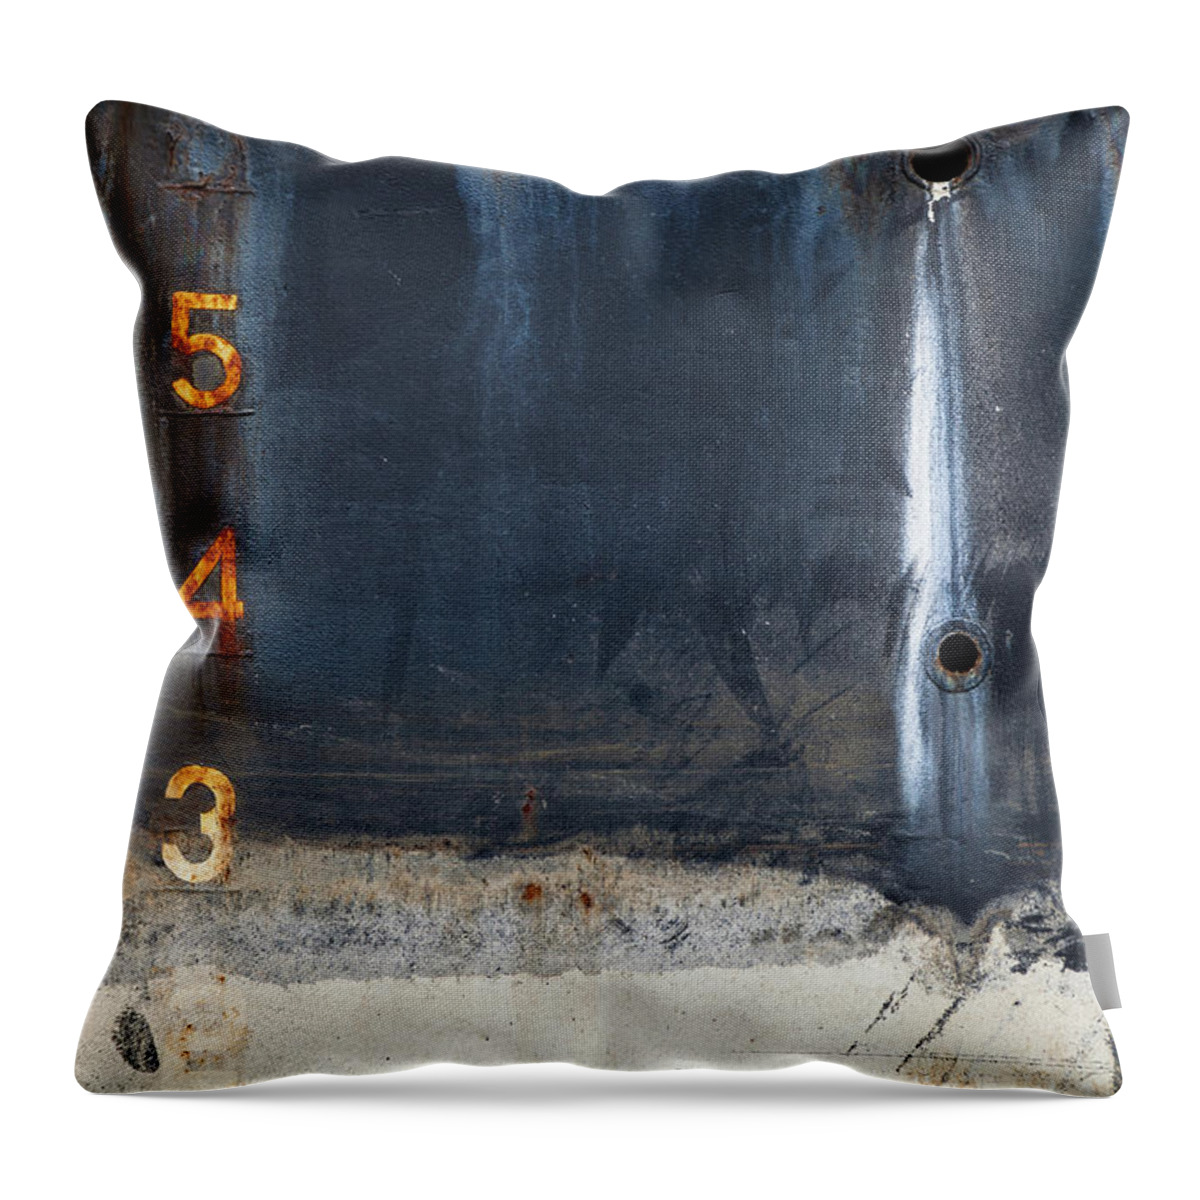 Barge Throw Pillow featuring the photograph Unappreciated Work by Scott Slone